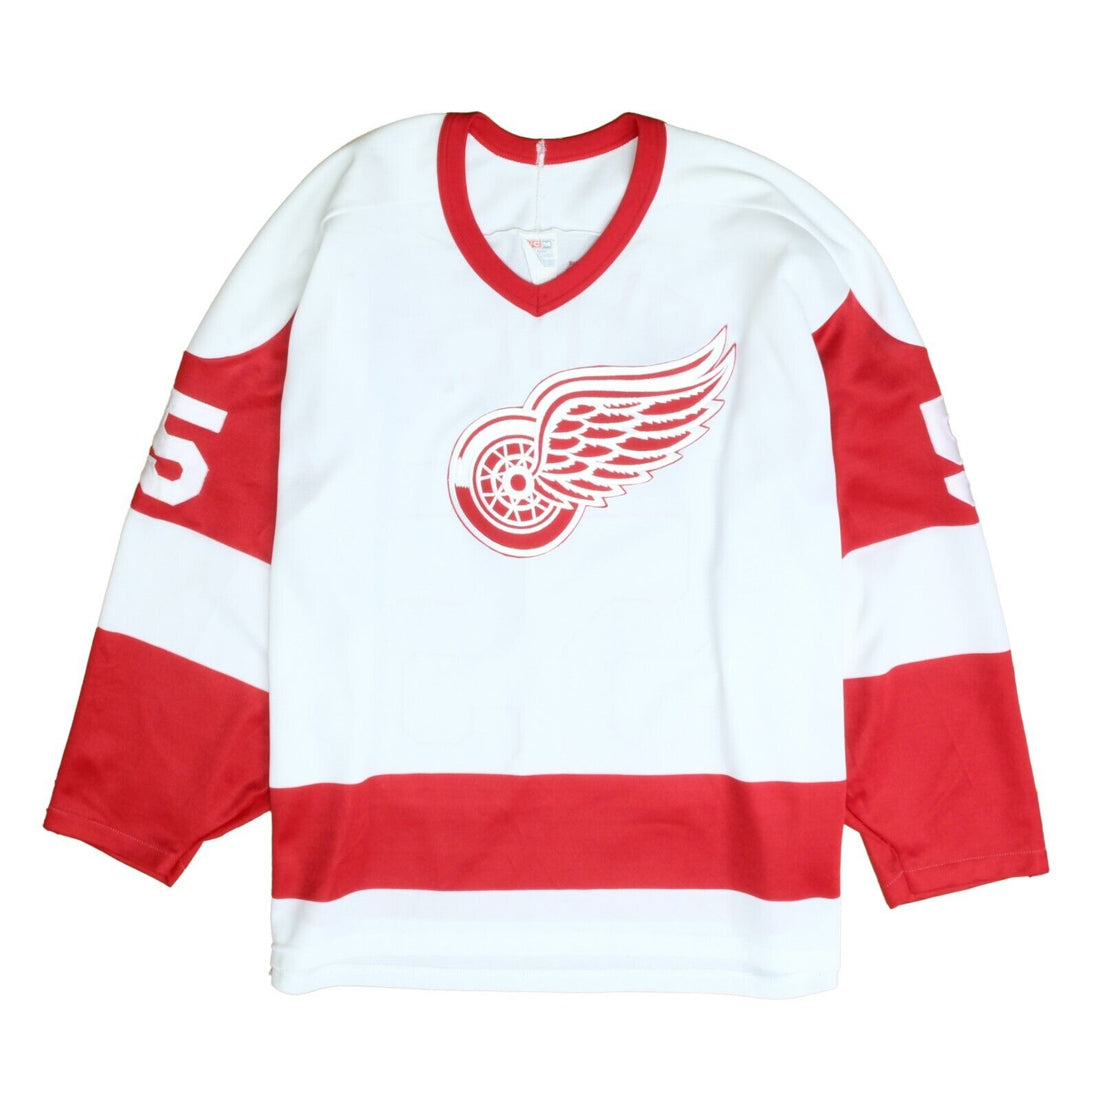 NHL Detroit Red Wings Jersey - XL